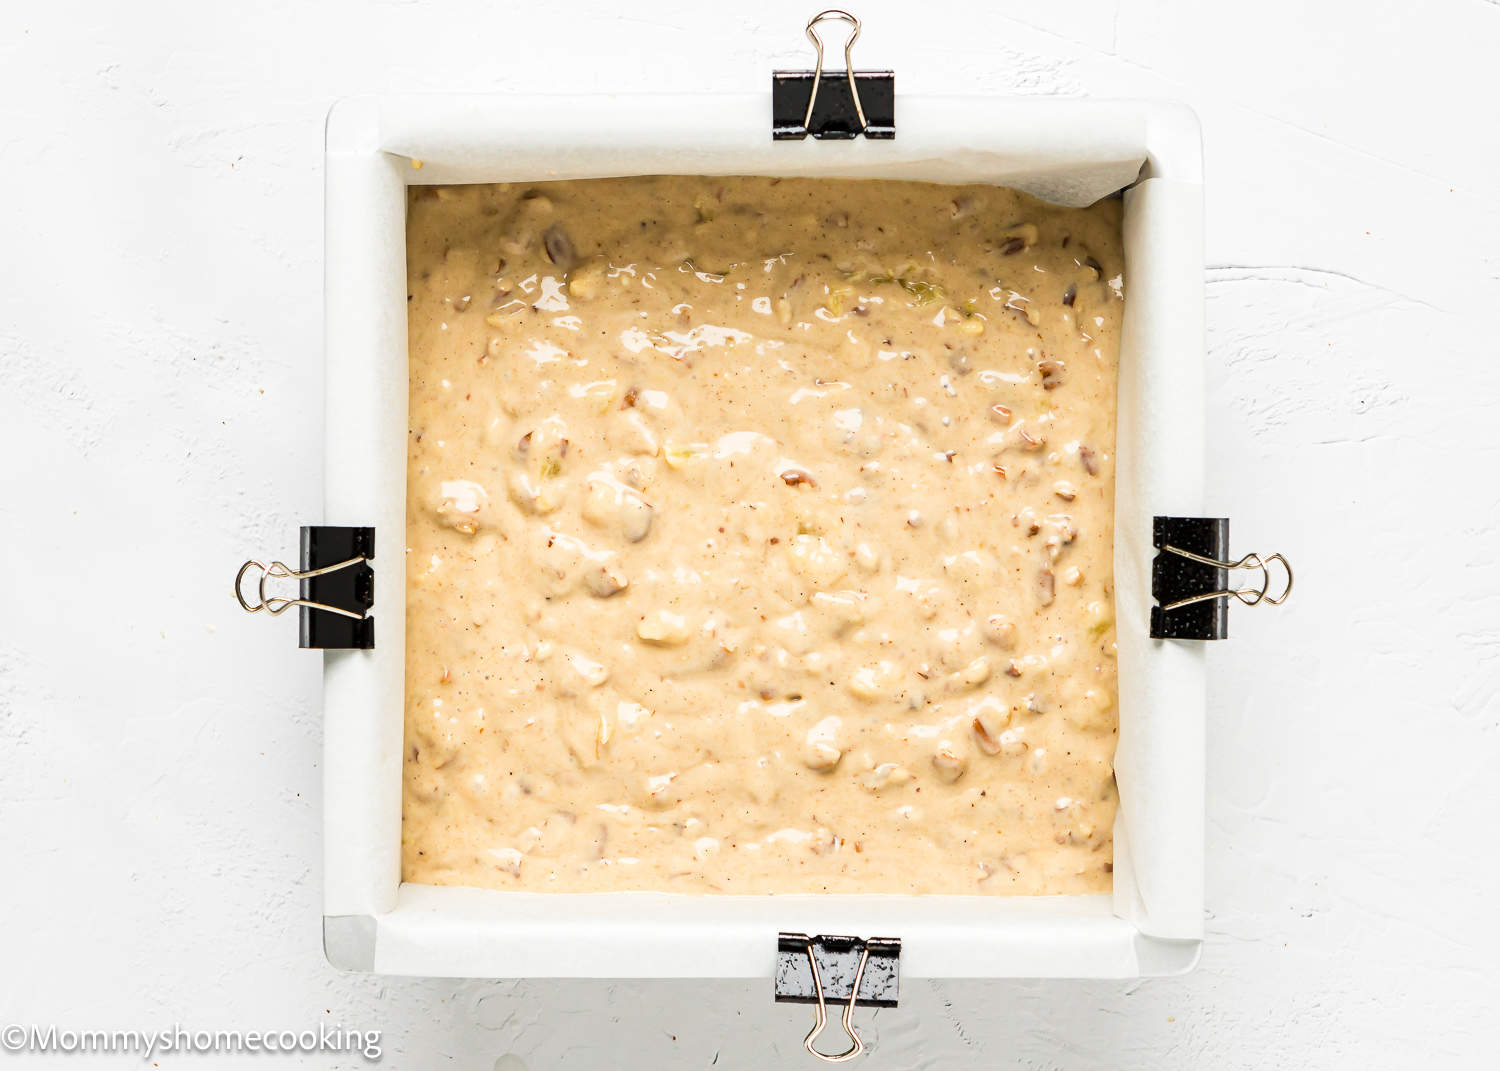 unbaked Hummingbird Cake in a square cake pan.